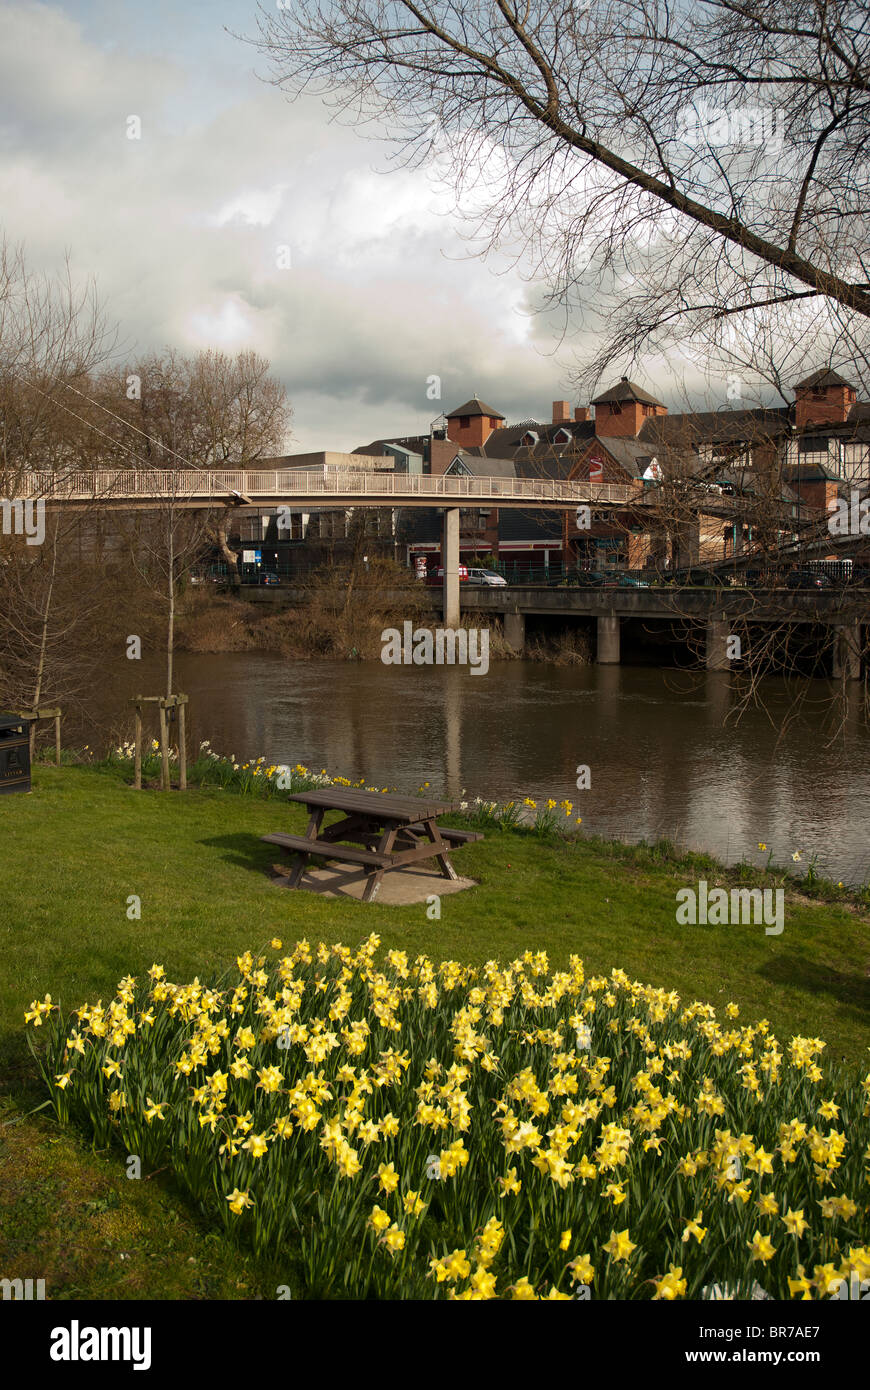 Beneath a sunny sky spring daffodils blooming on the banks of the River Severn in Shrewsbury, Shropshire, England, UK Stock Photo